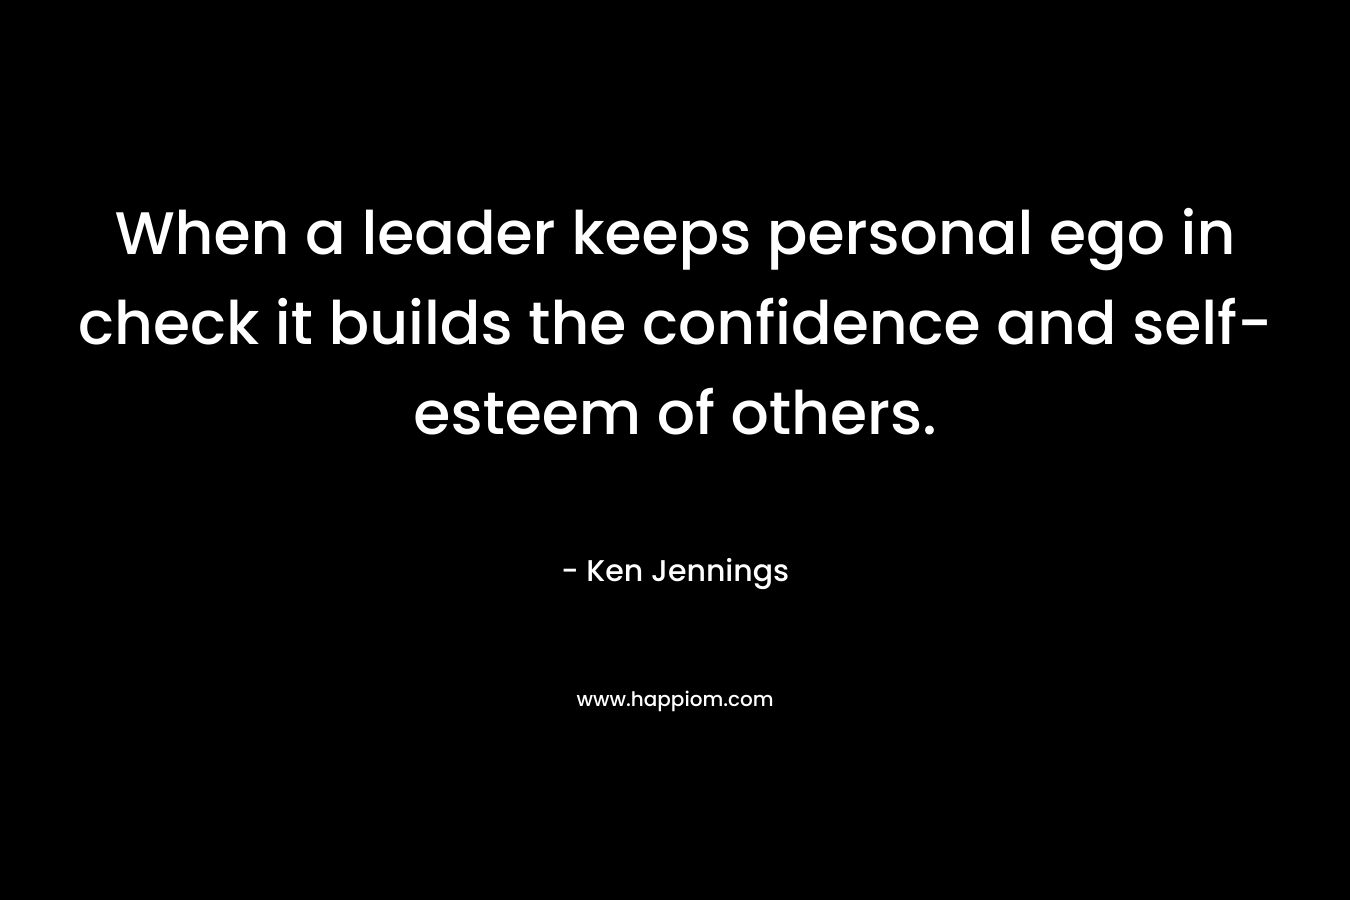 When a leader keeps personal ego in check it builds the confidence and self-esteem of others.